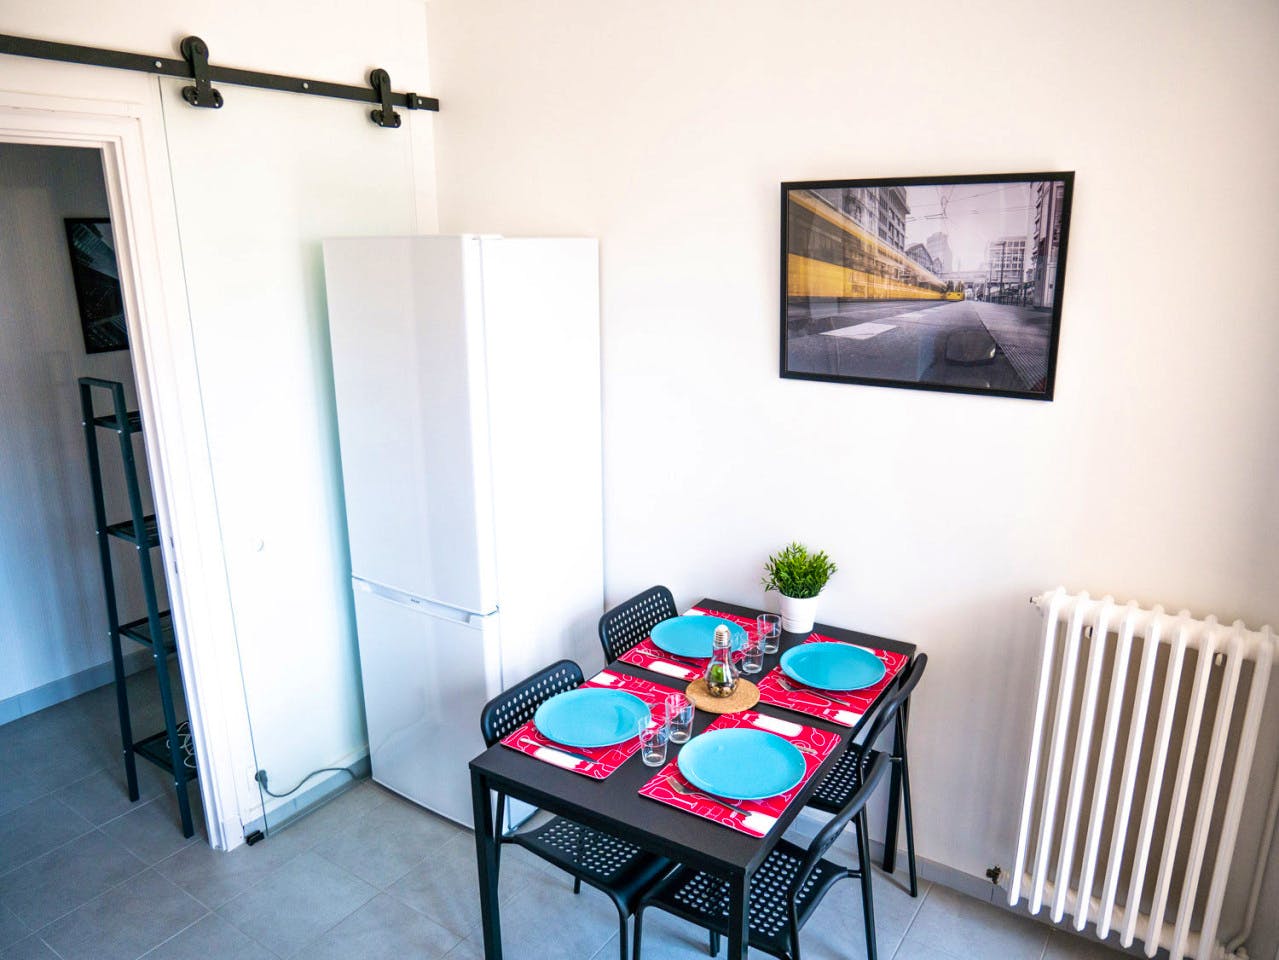 Luxury apartment located in the heart of downtown Toulouse